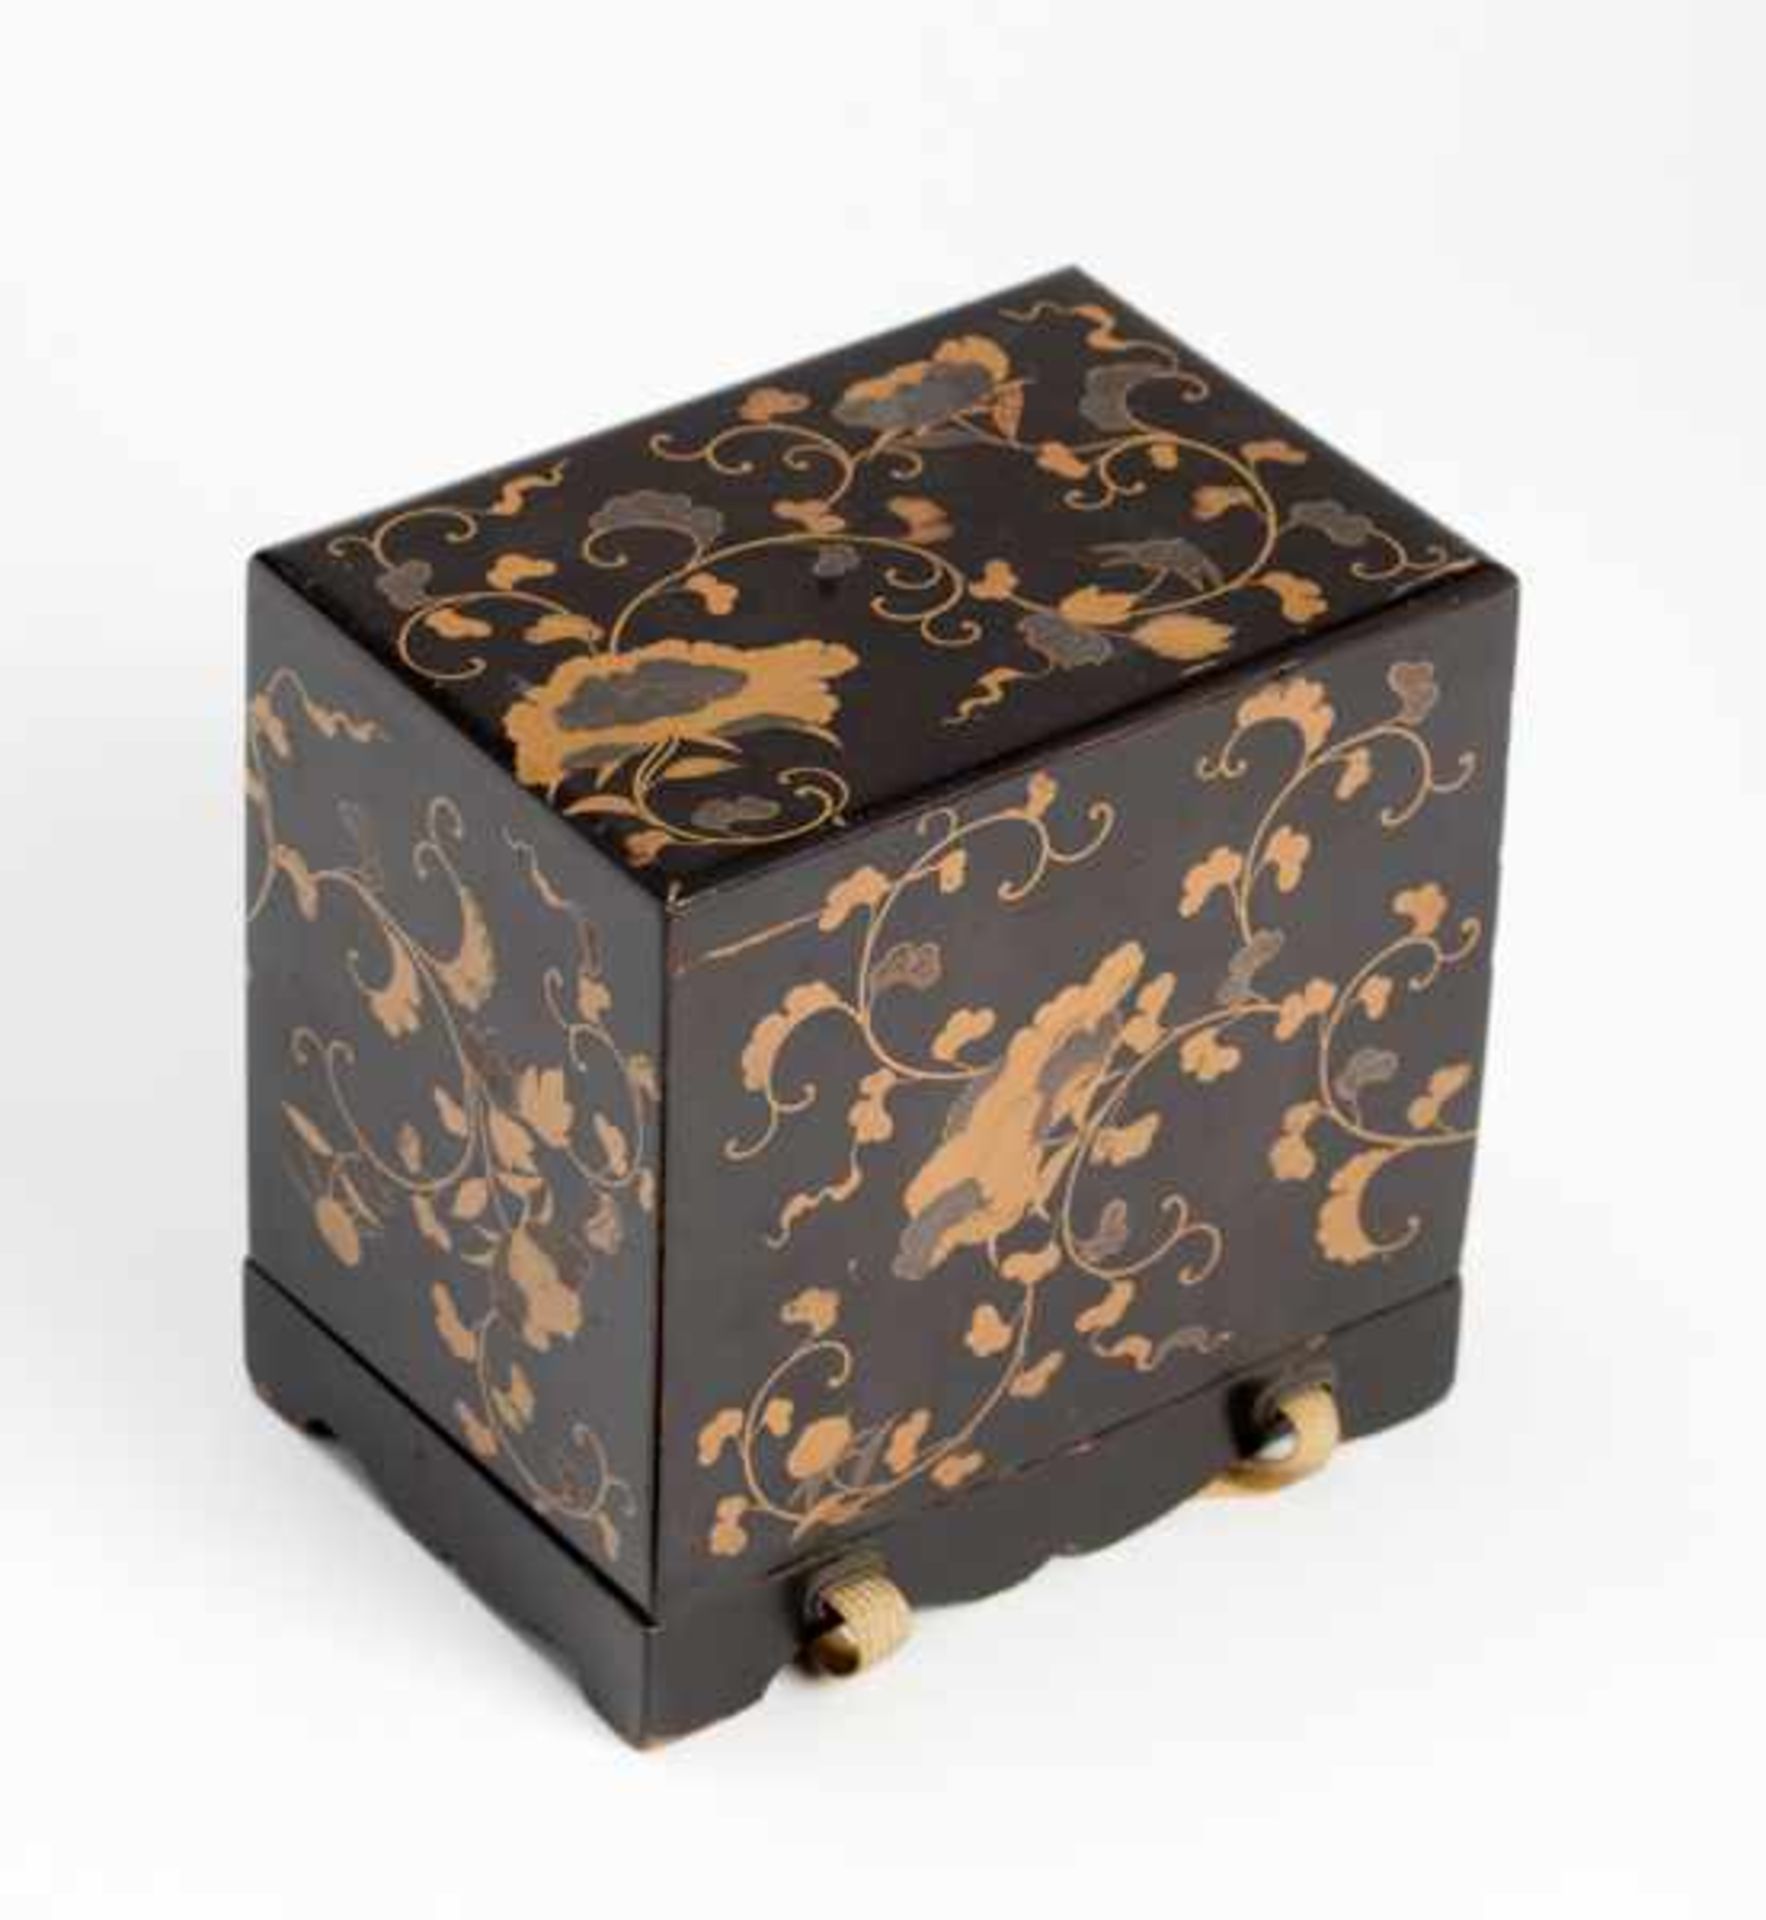 RARE SMALL BOX WITH UTAGARUTA PLAYING CARDS Lacquer, gold, silver and paint. Japan, 19th century - Image 5 of 7